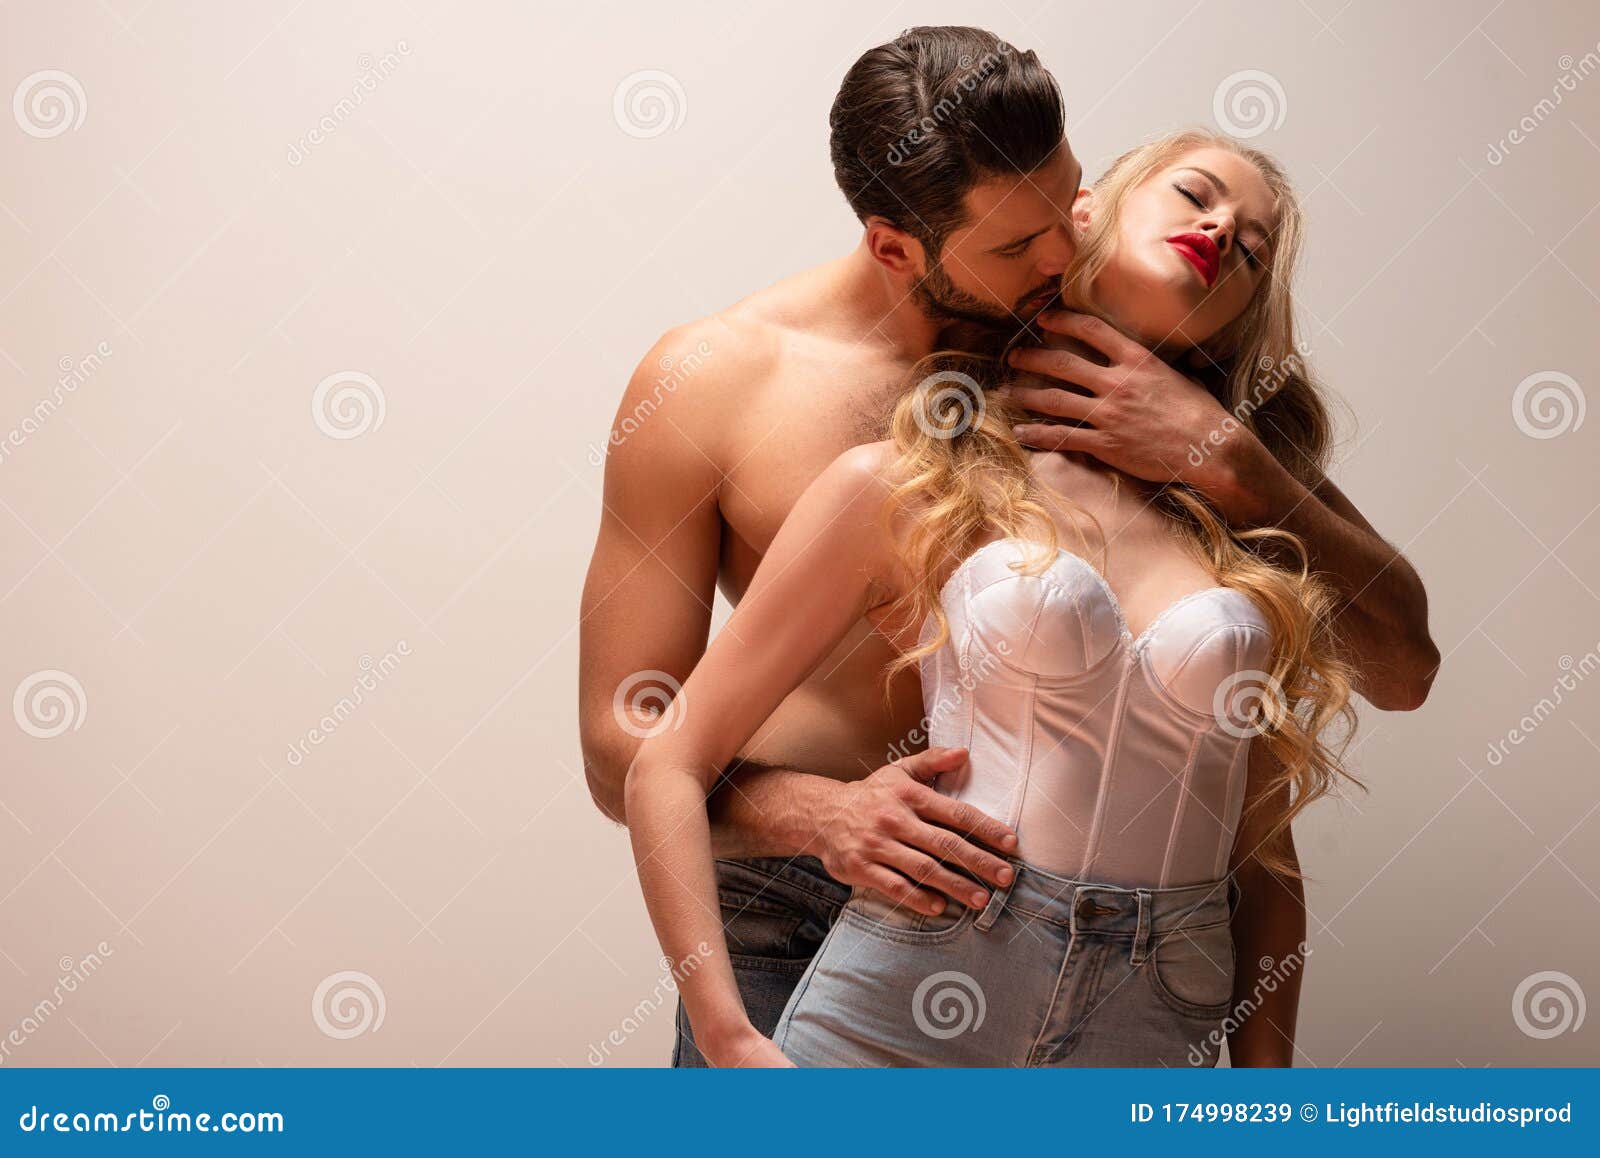 701 Kissing Man Sexy Photos - Free & Royalty-Free Stock Photos from  Dreamstime